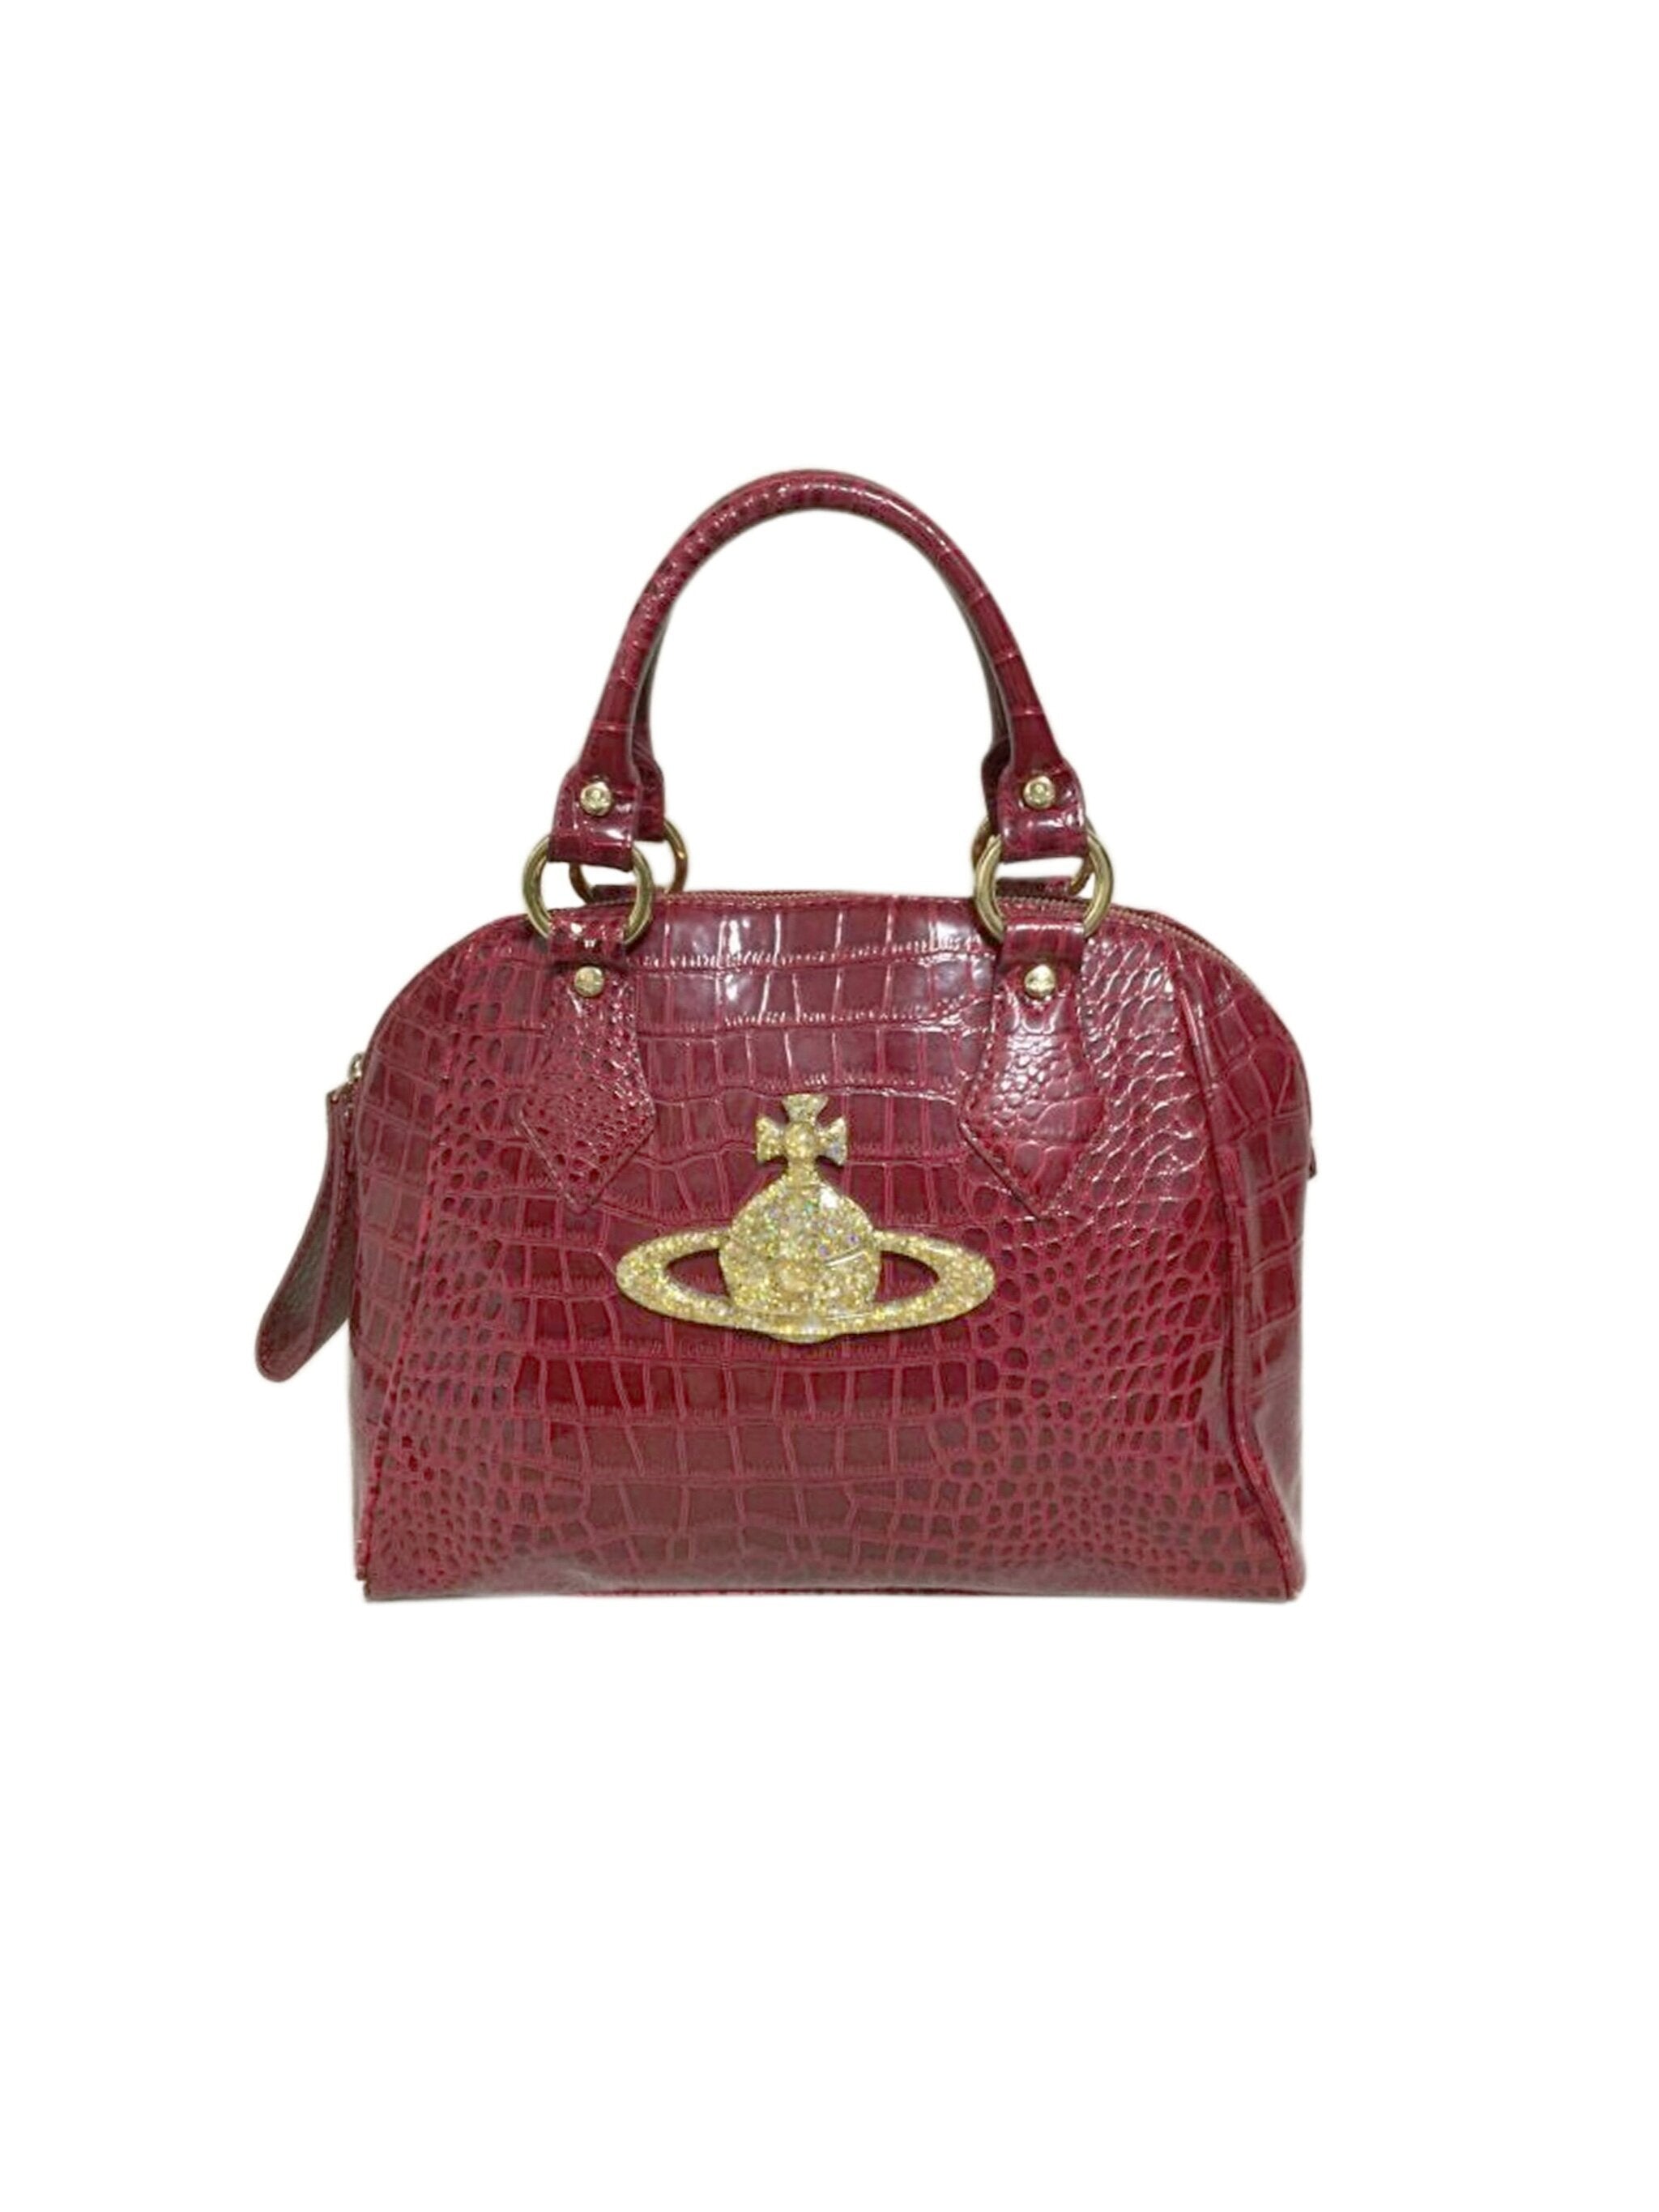 Chancery heart leather handbag Vivienne Westwood Red in Leather